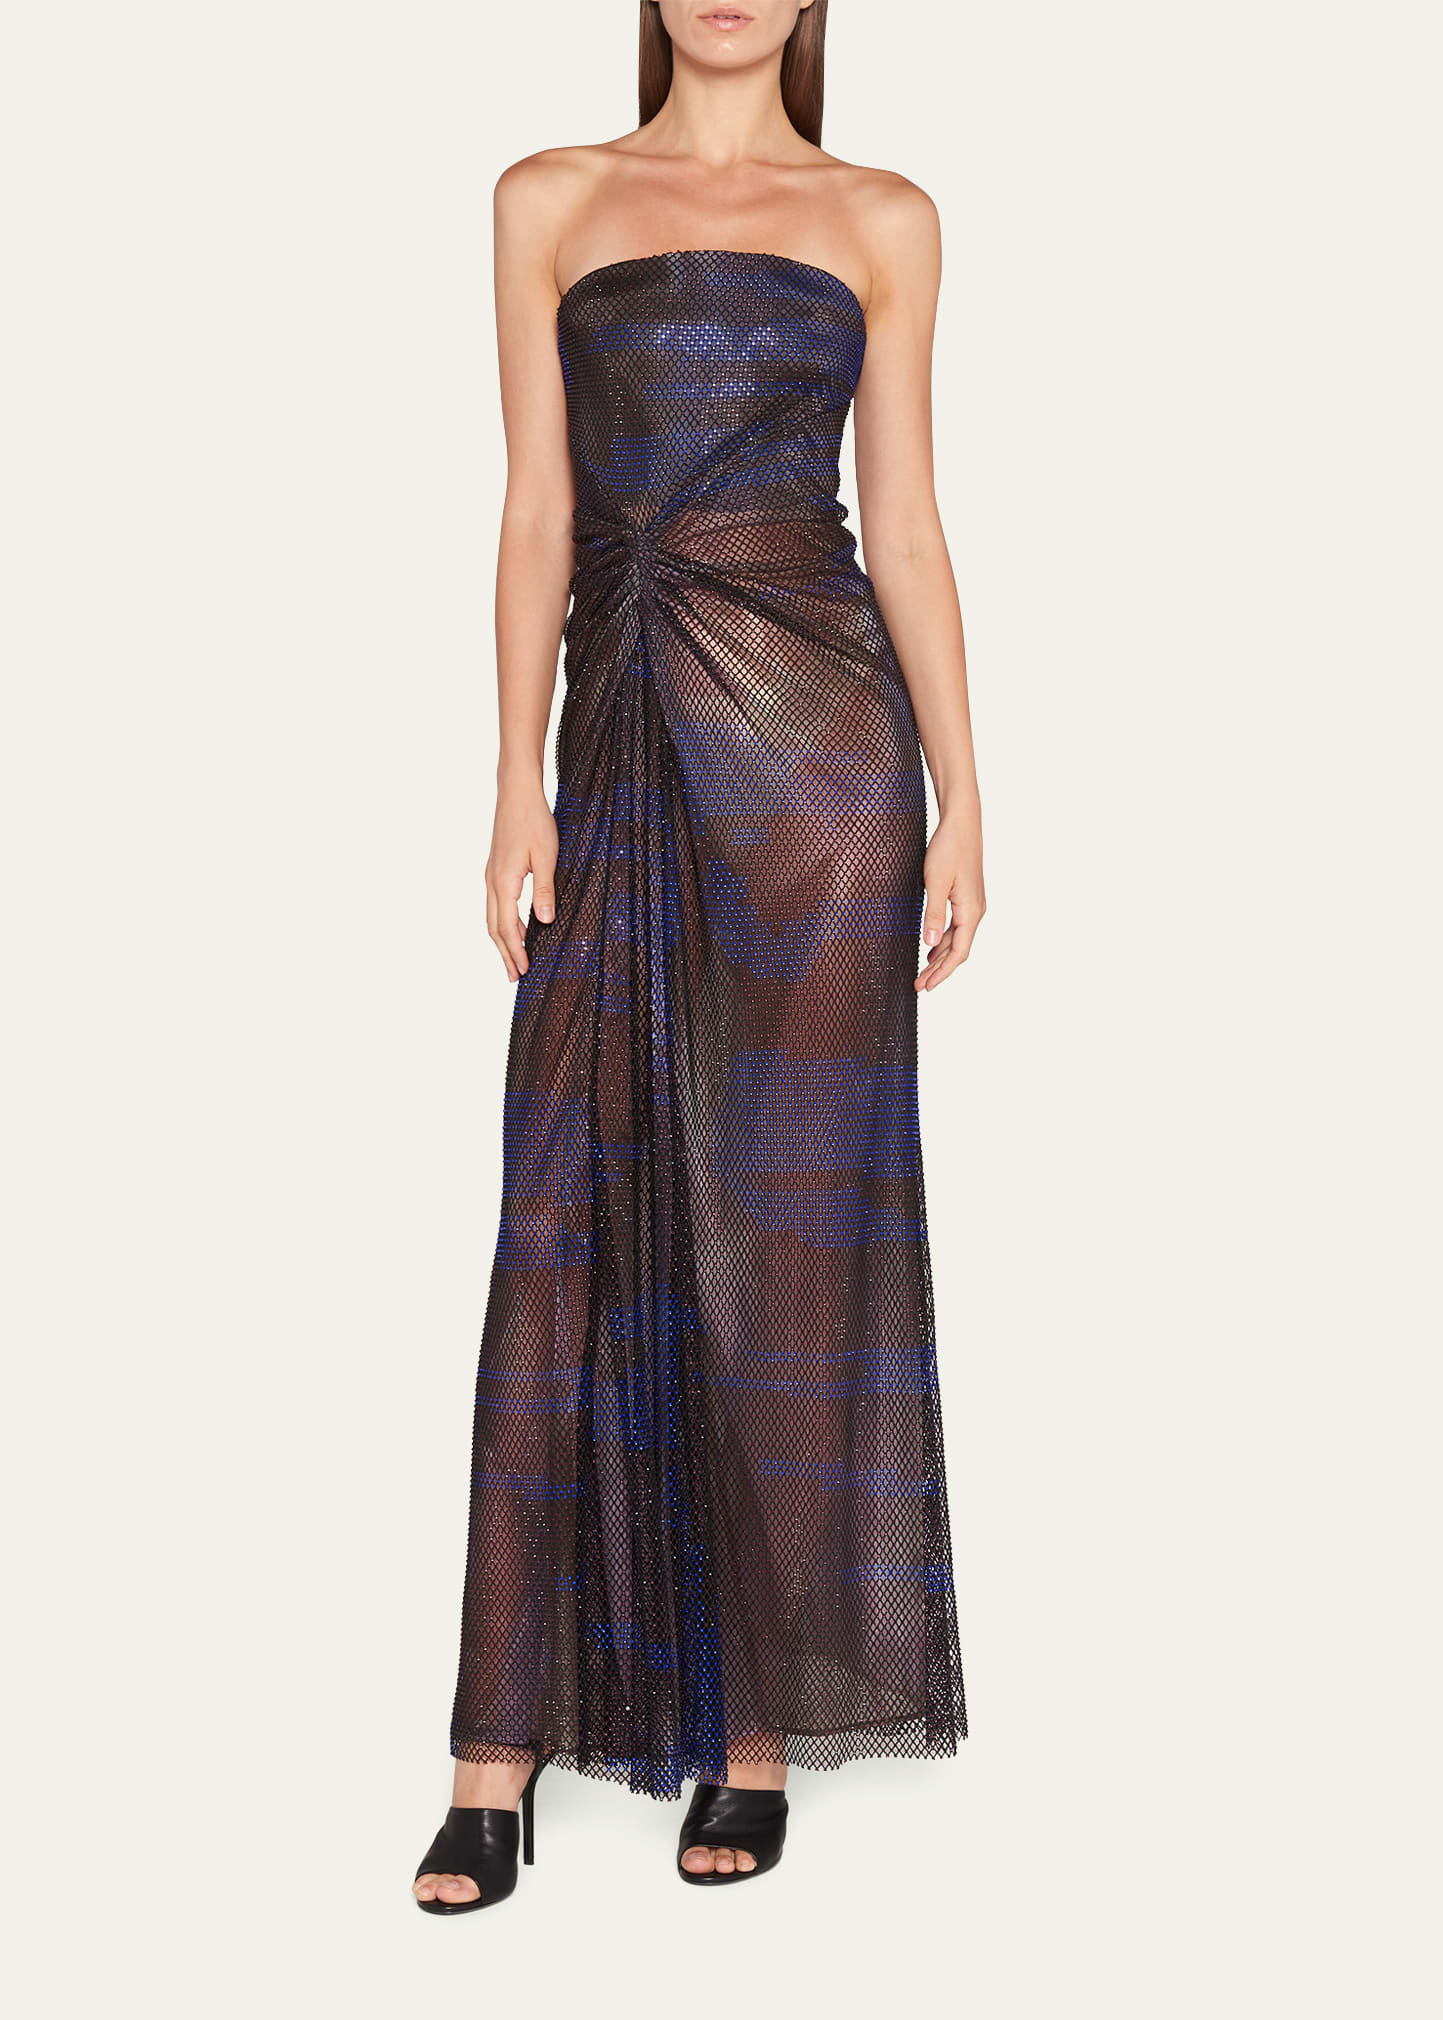 Strass Mesh Gathered Strapless Gown